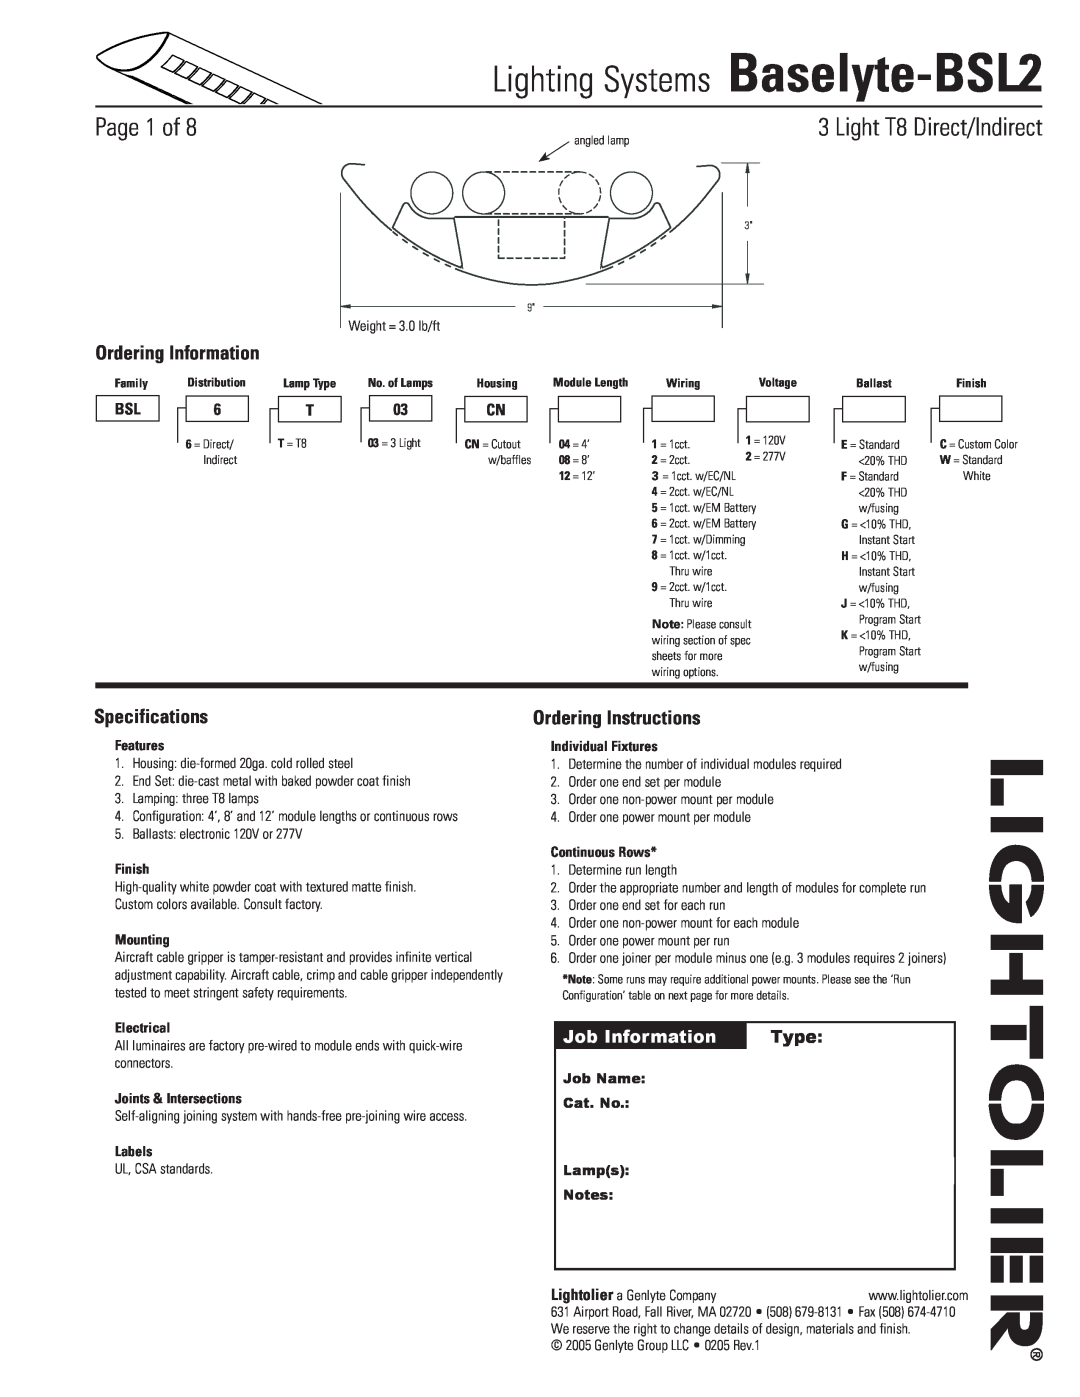 Lightolier specifications Lighting Systems Baselyte-BSL2, Page of, Light T8 Direct/Indirect, Ordering Information, Type 